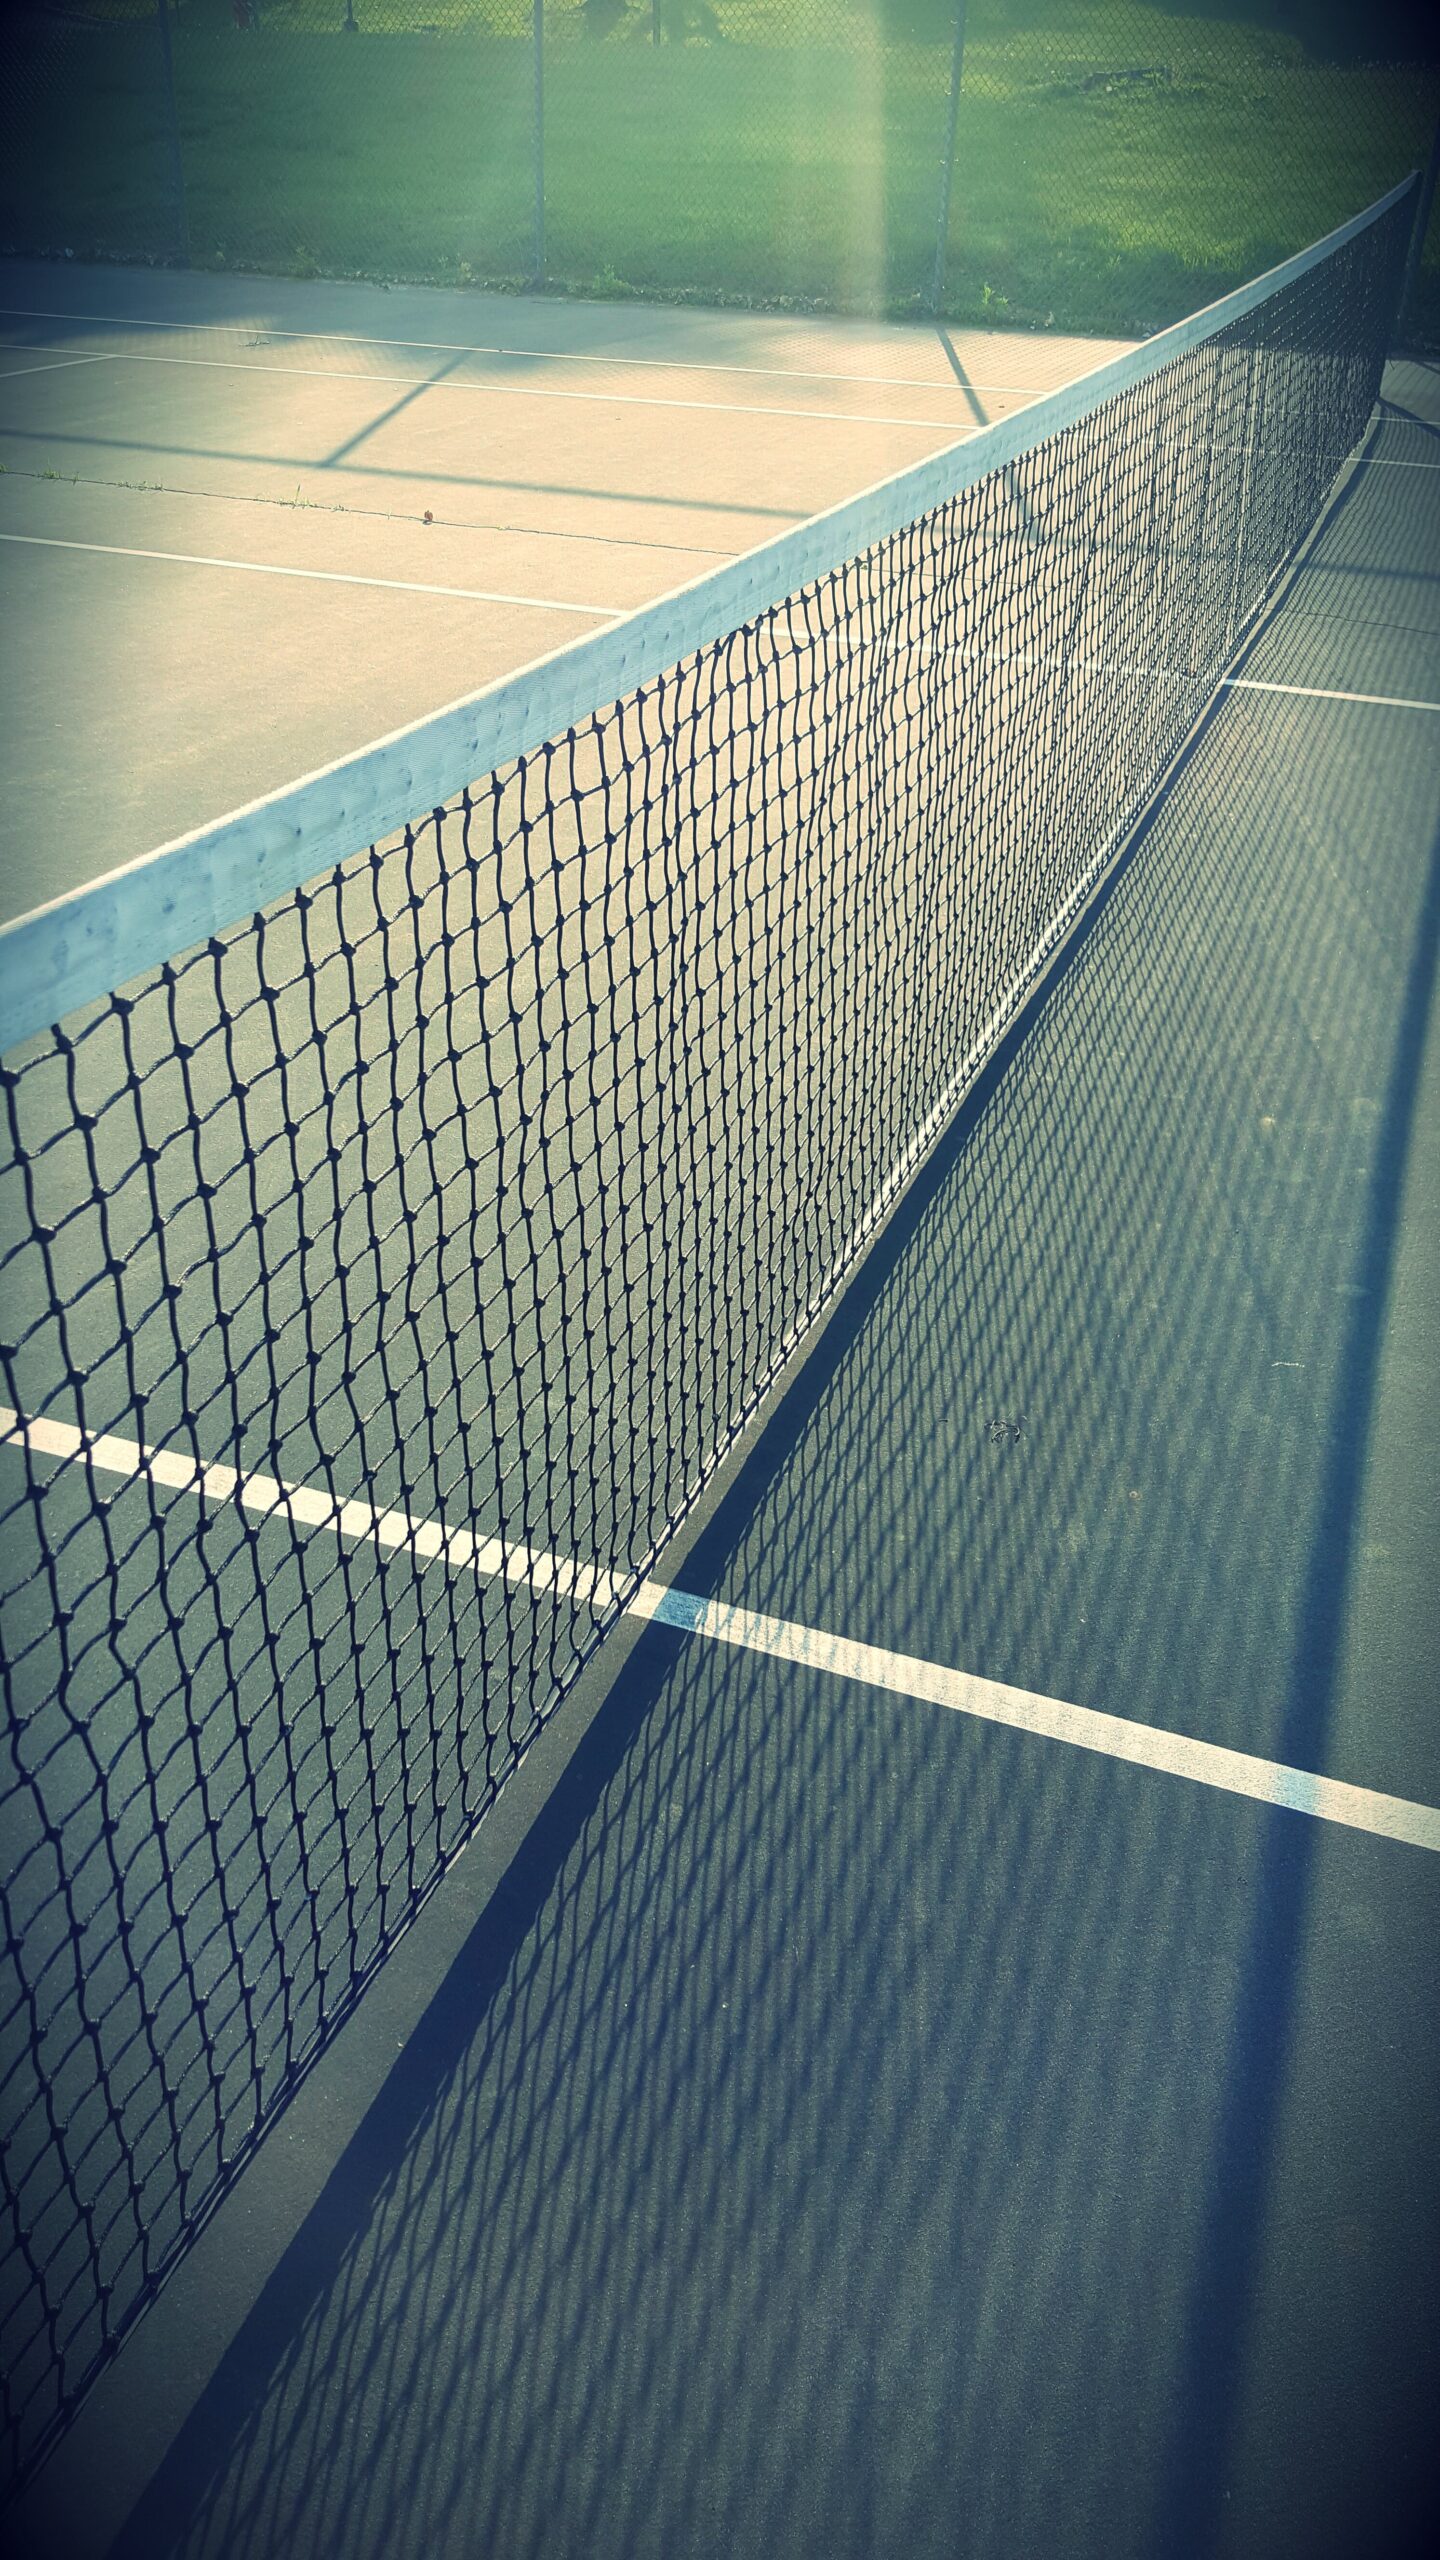 We assisted Tennis Academy LLC in applying for digital transformation support